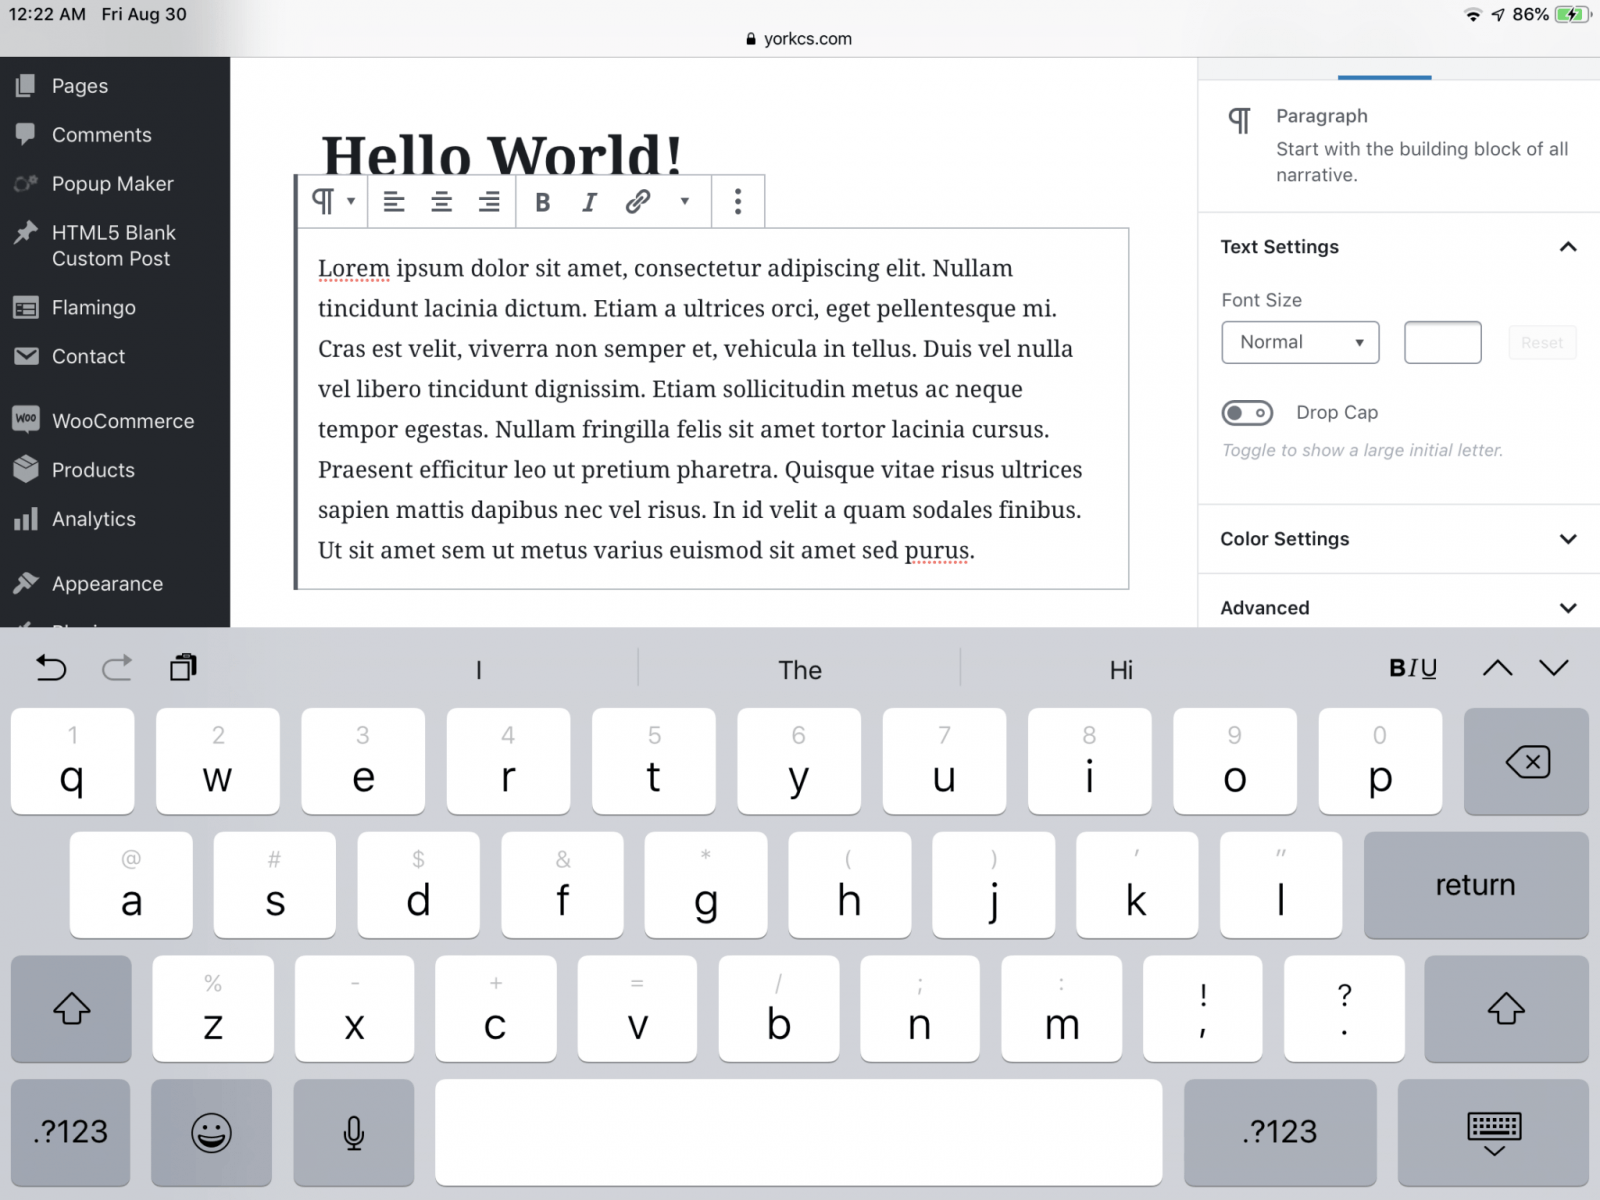 This screenshot shows some sample text inside the default paragraph block.